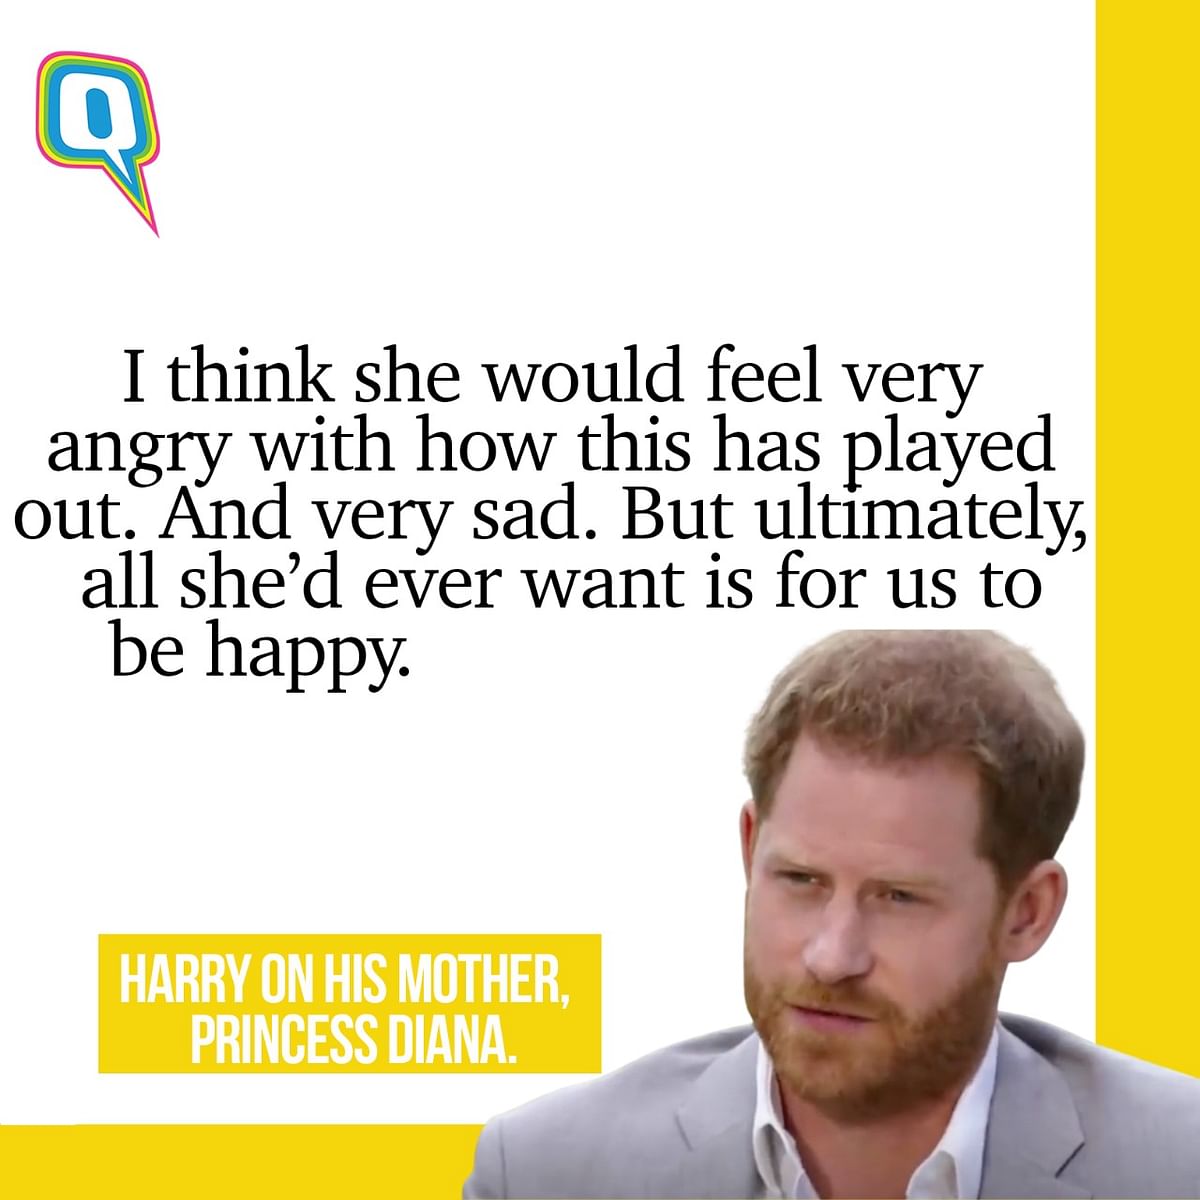 All The Key Quotes from Meghan & Harry's Interview With Oprah